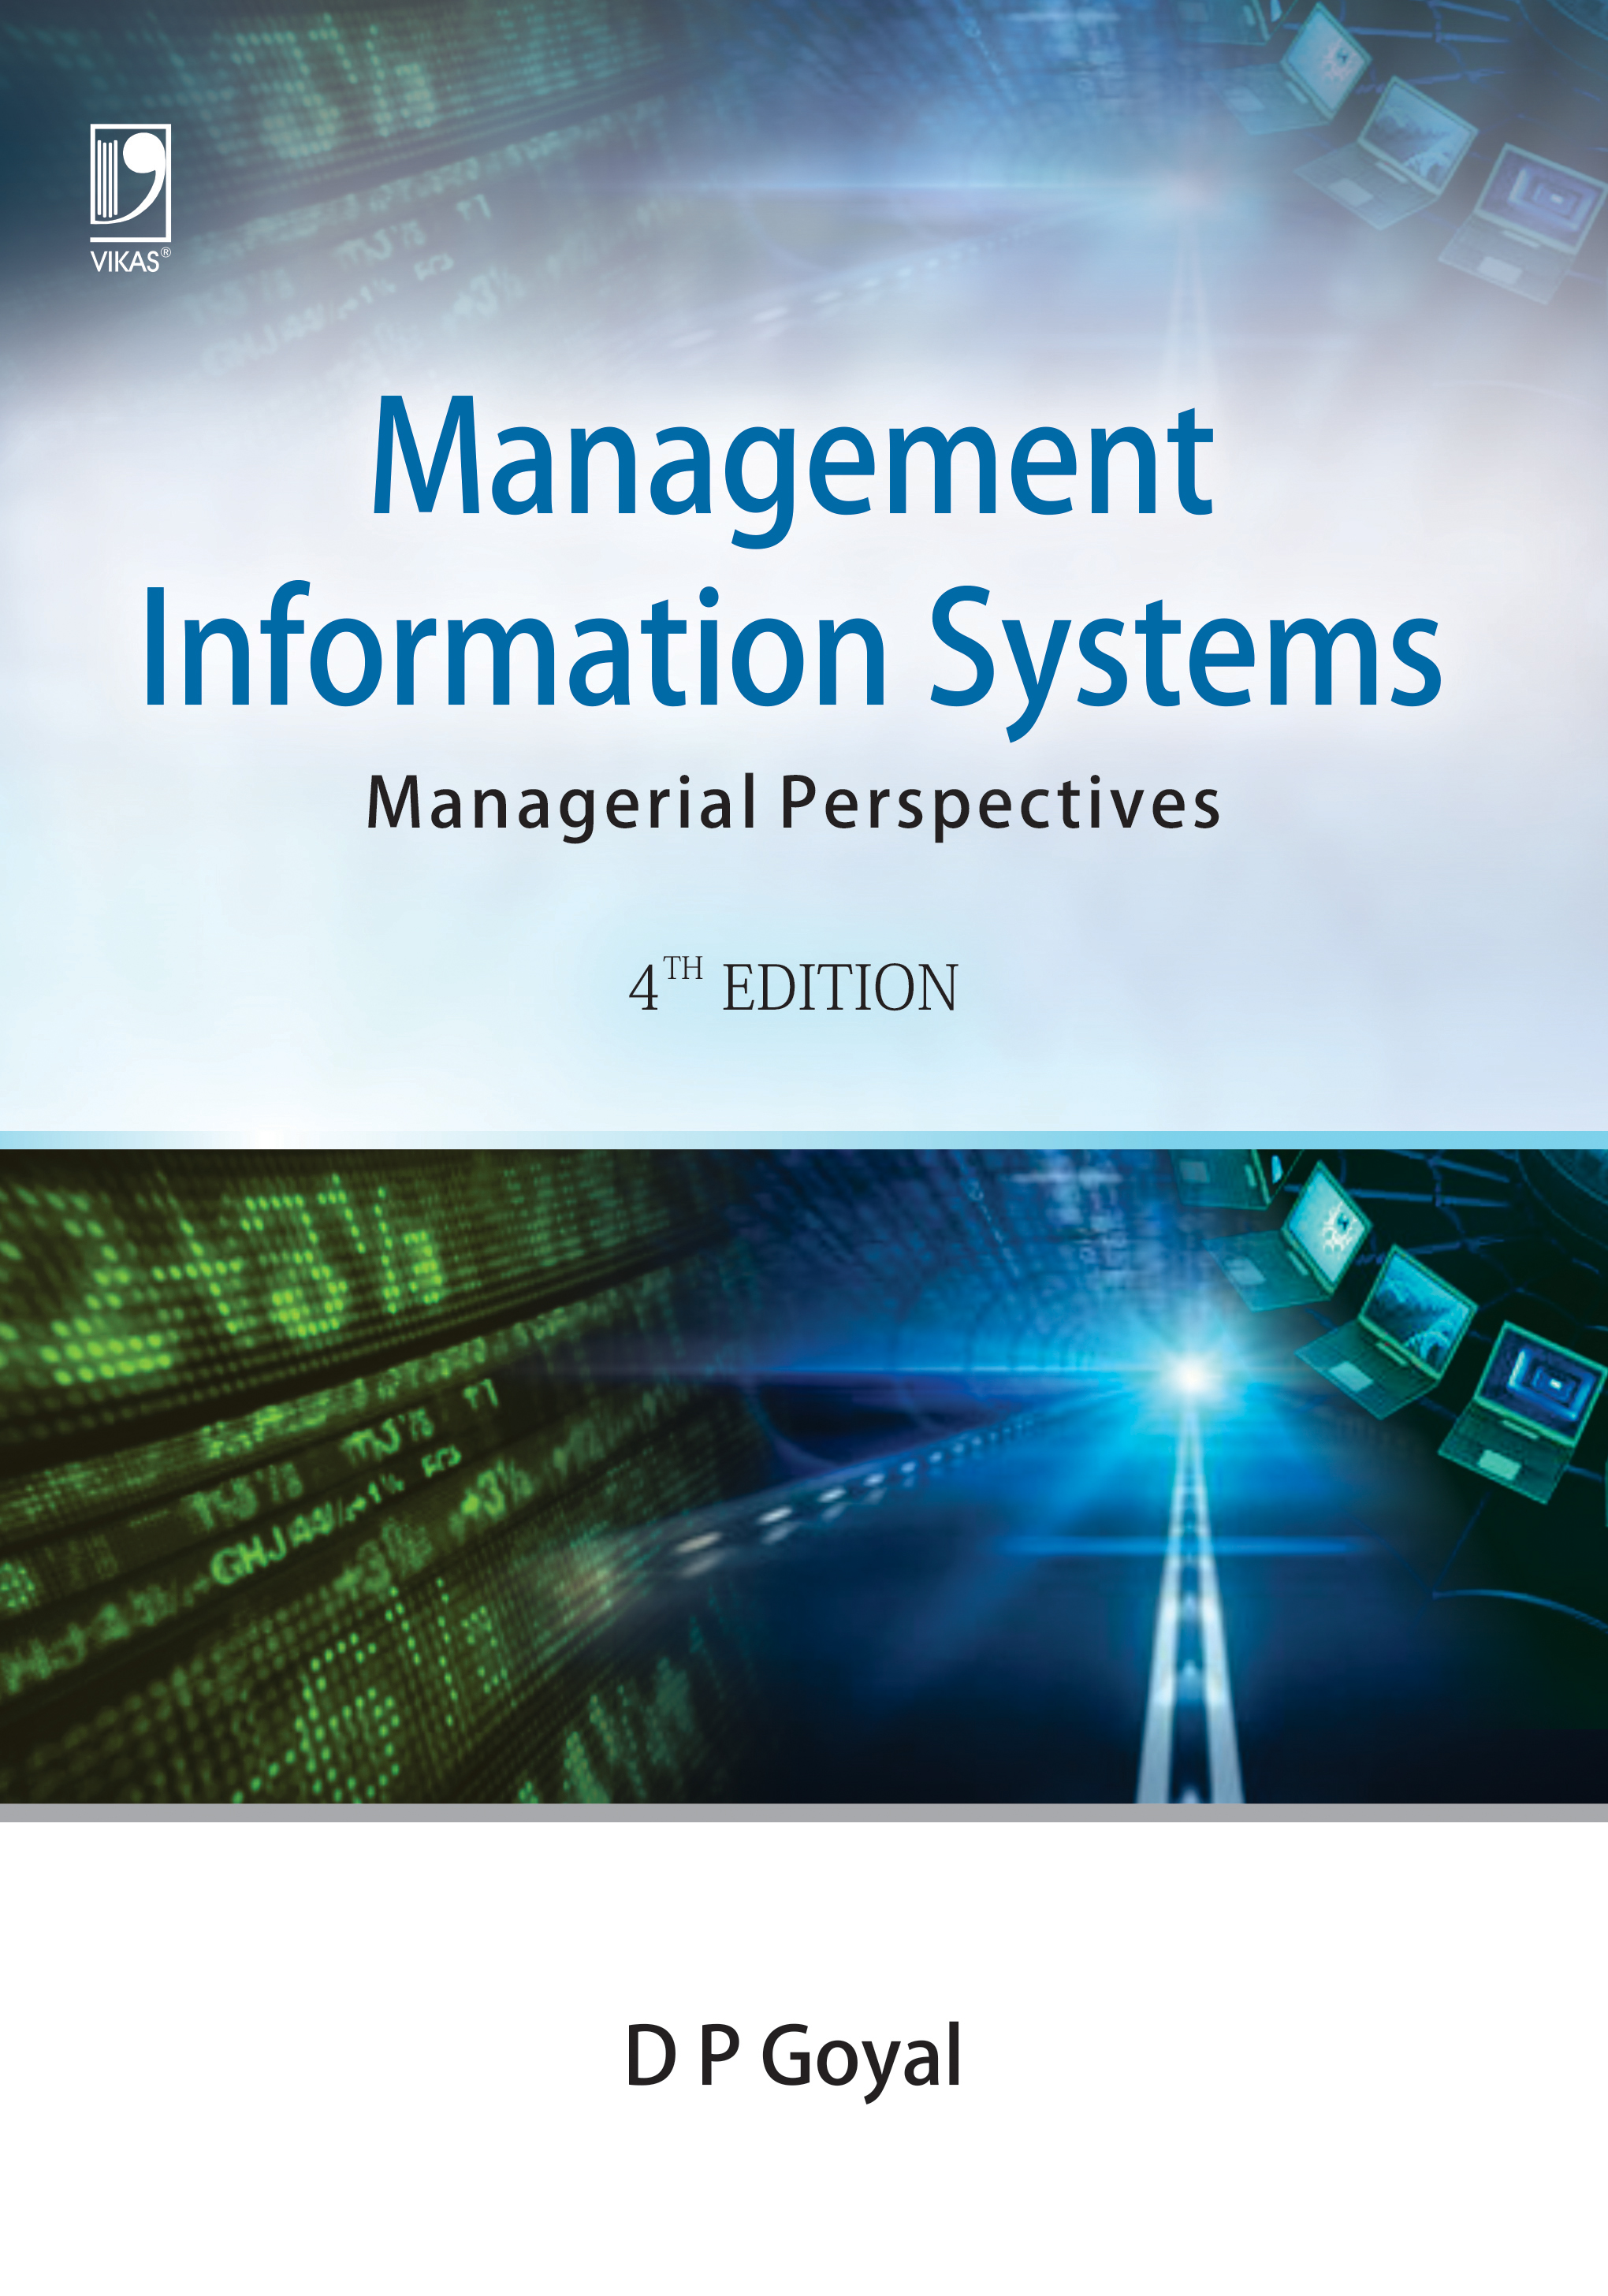 Management Information Systems: Managerial Perspectives